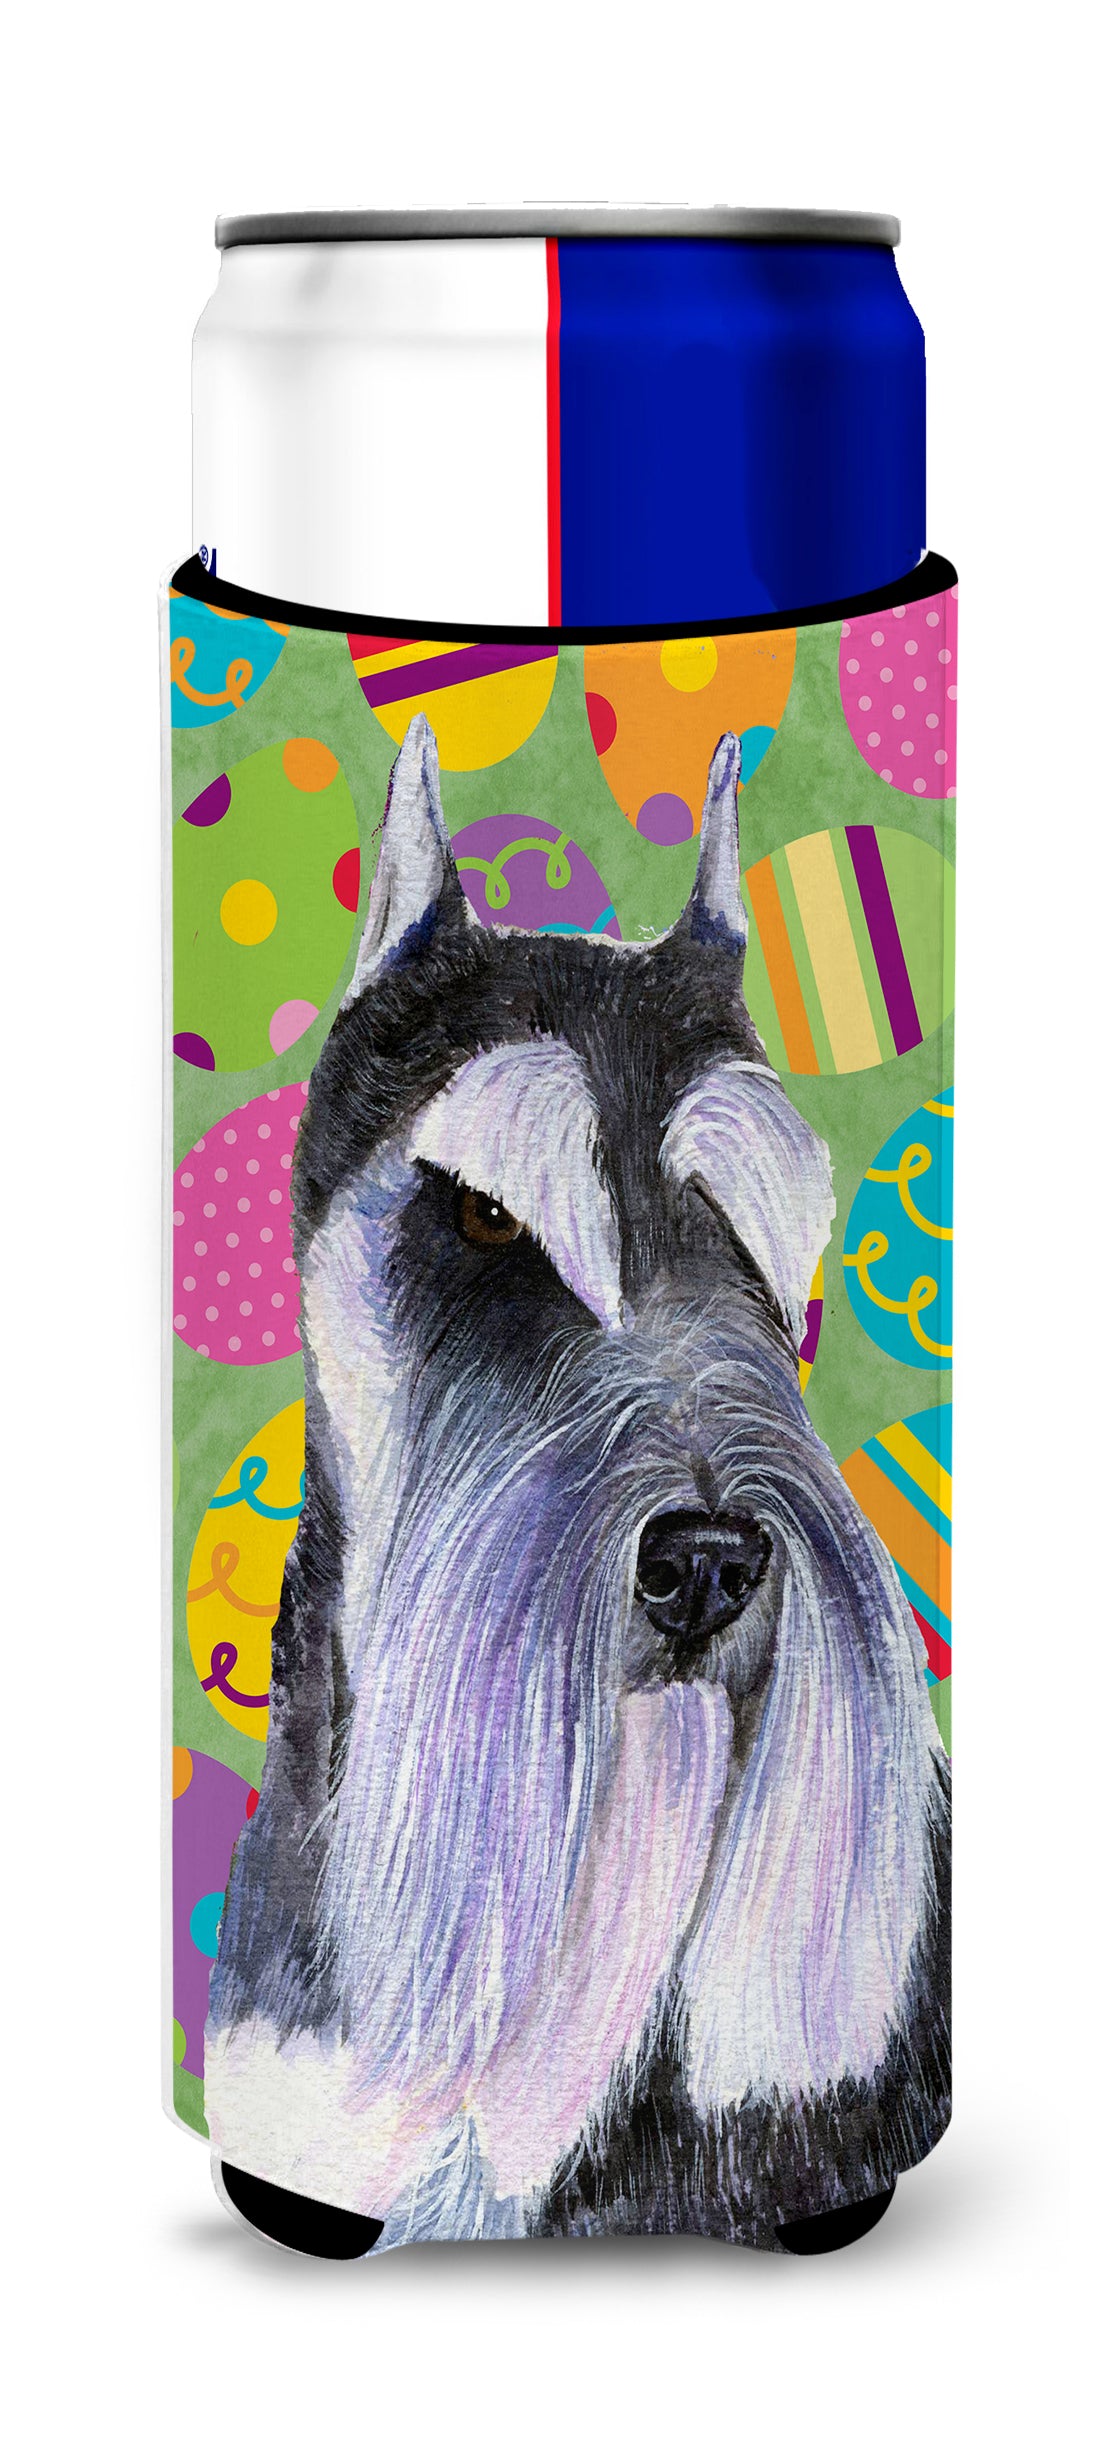 Schnauzer Easter Eggtravaganza Ultra Beverage Insulators for slim cans SS4822MUK.